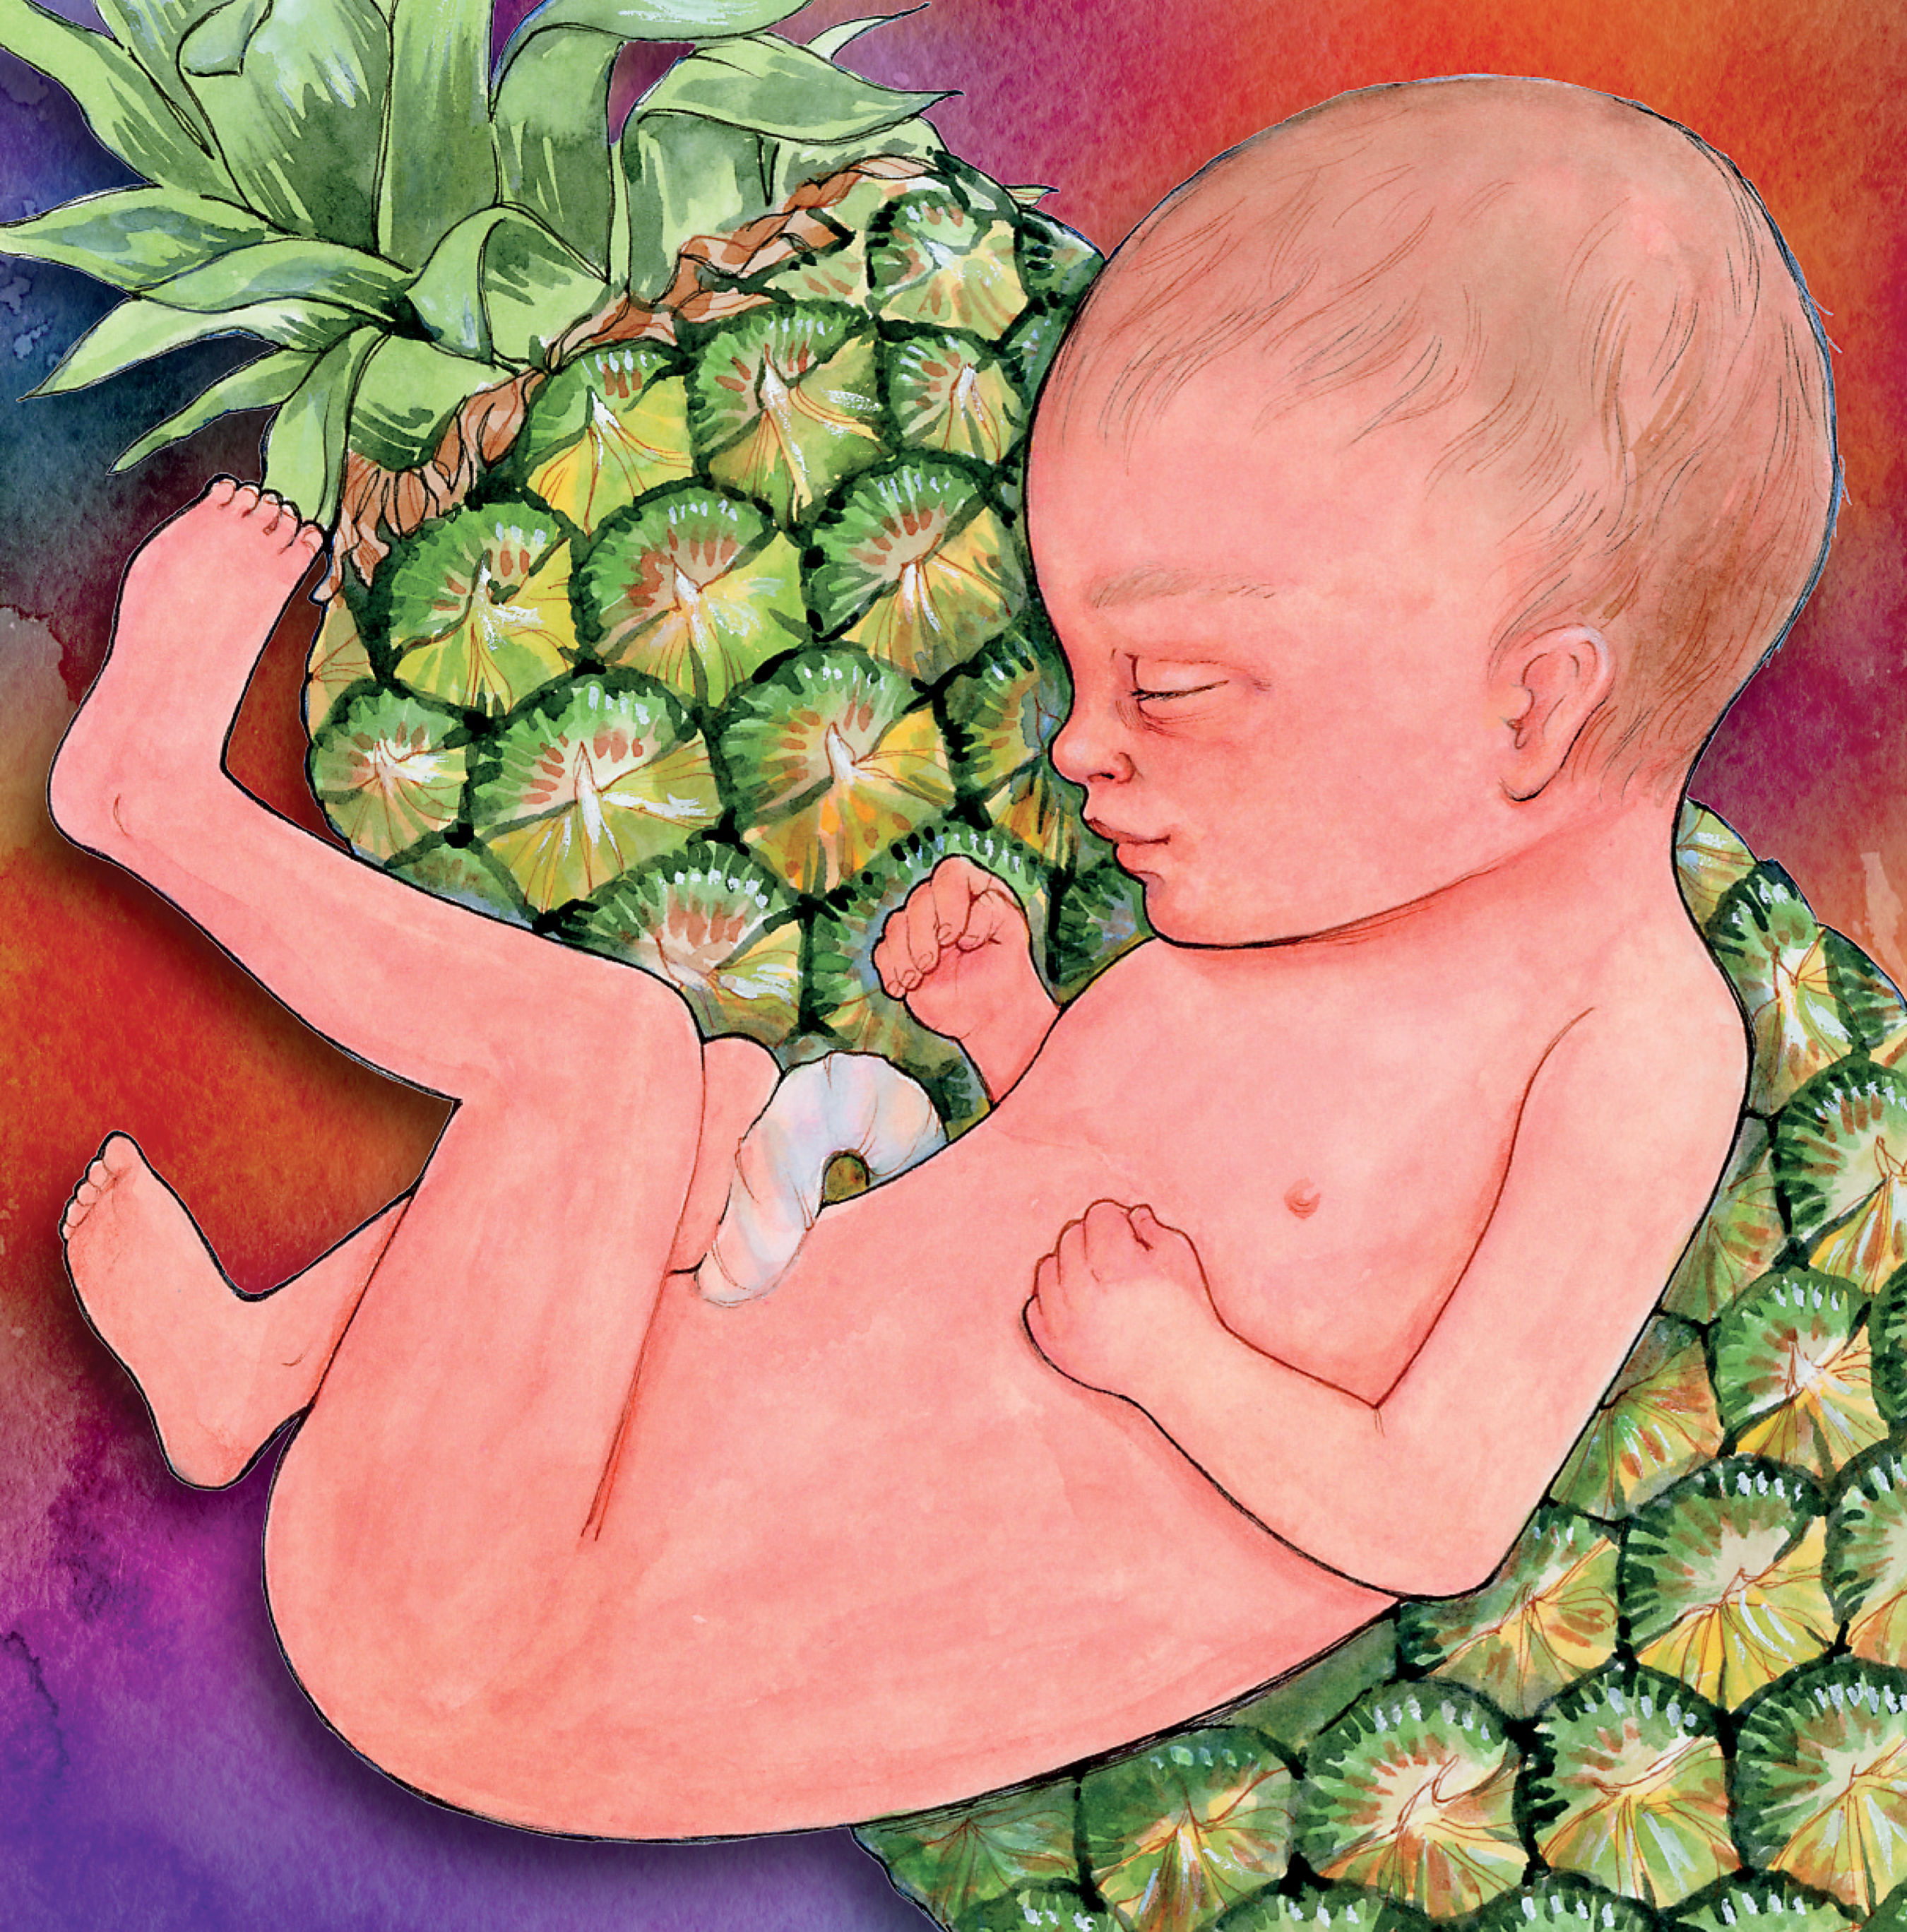 Artwork showing the babys size in comparison to a pineapple.